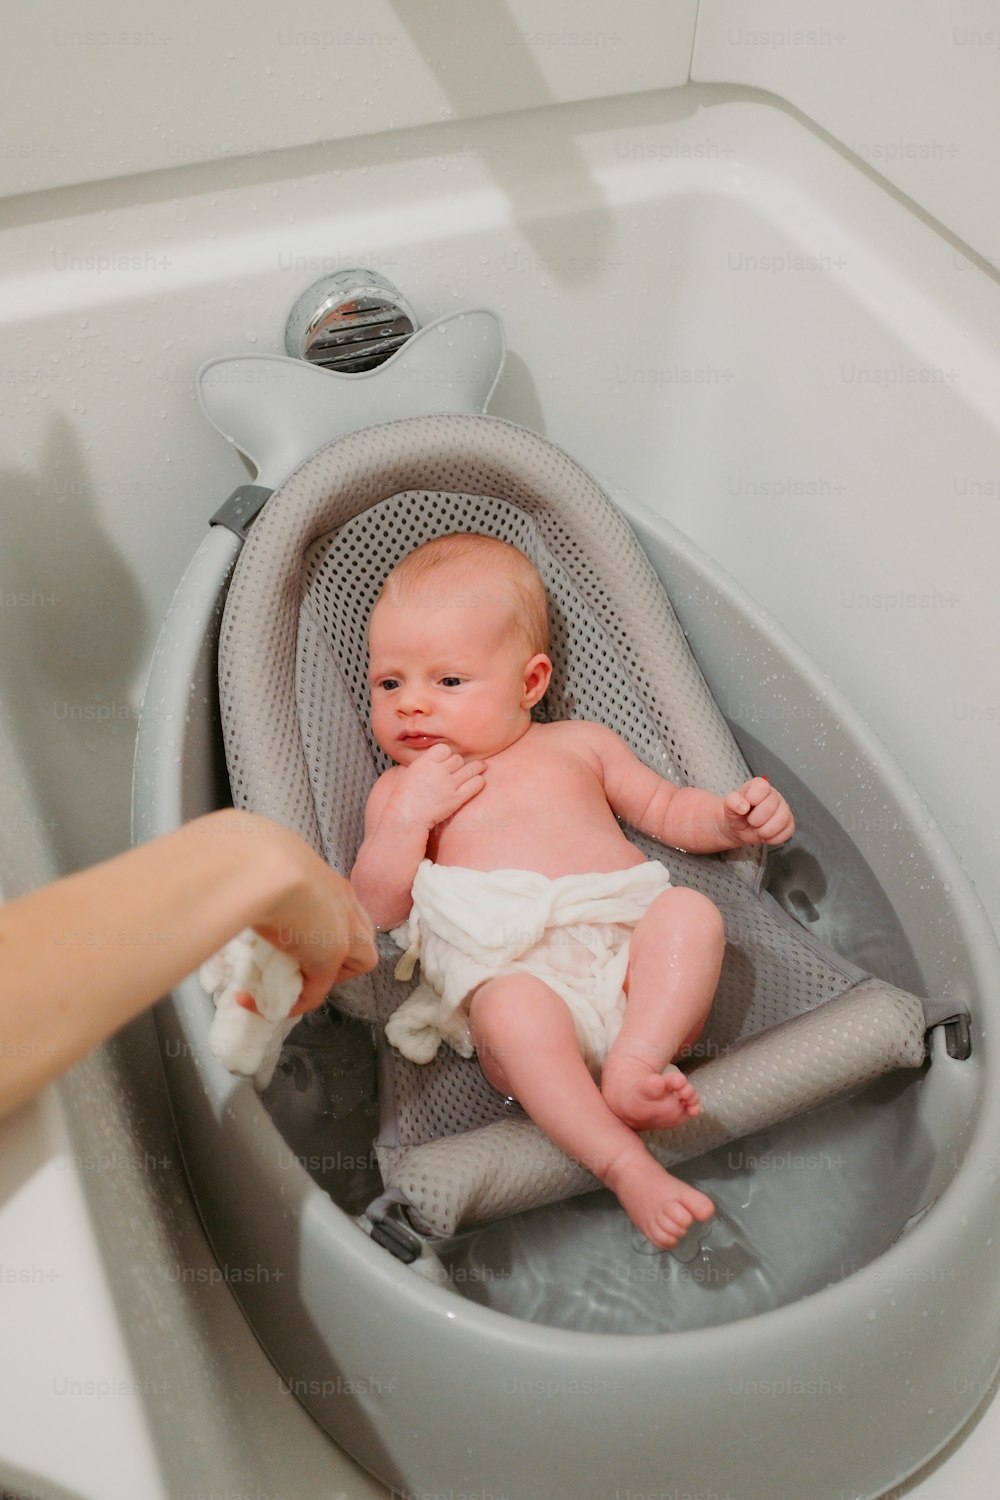 a baby in a bathtub being held by a person